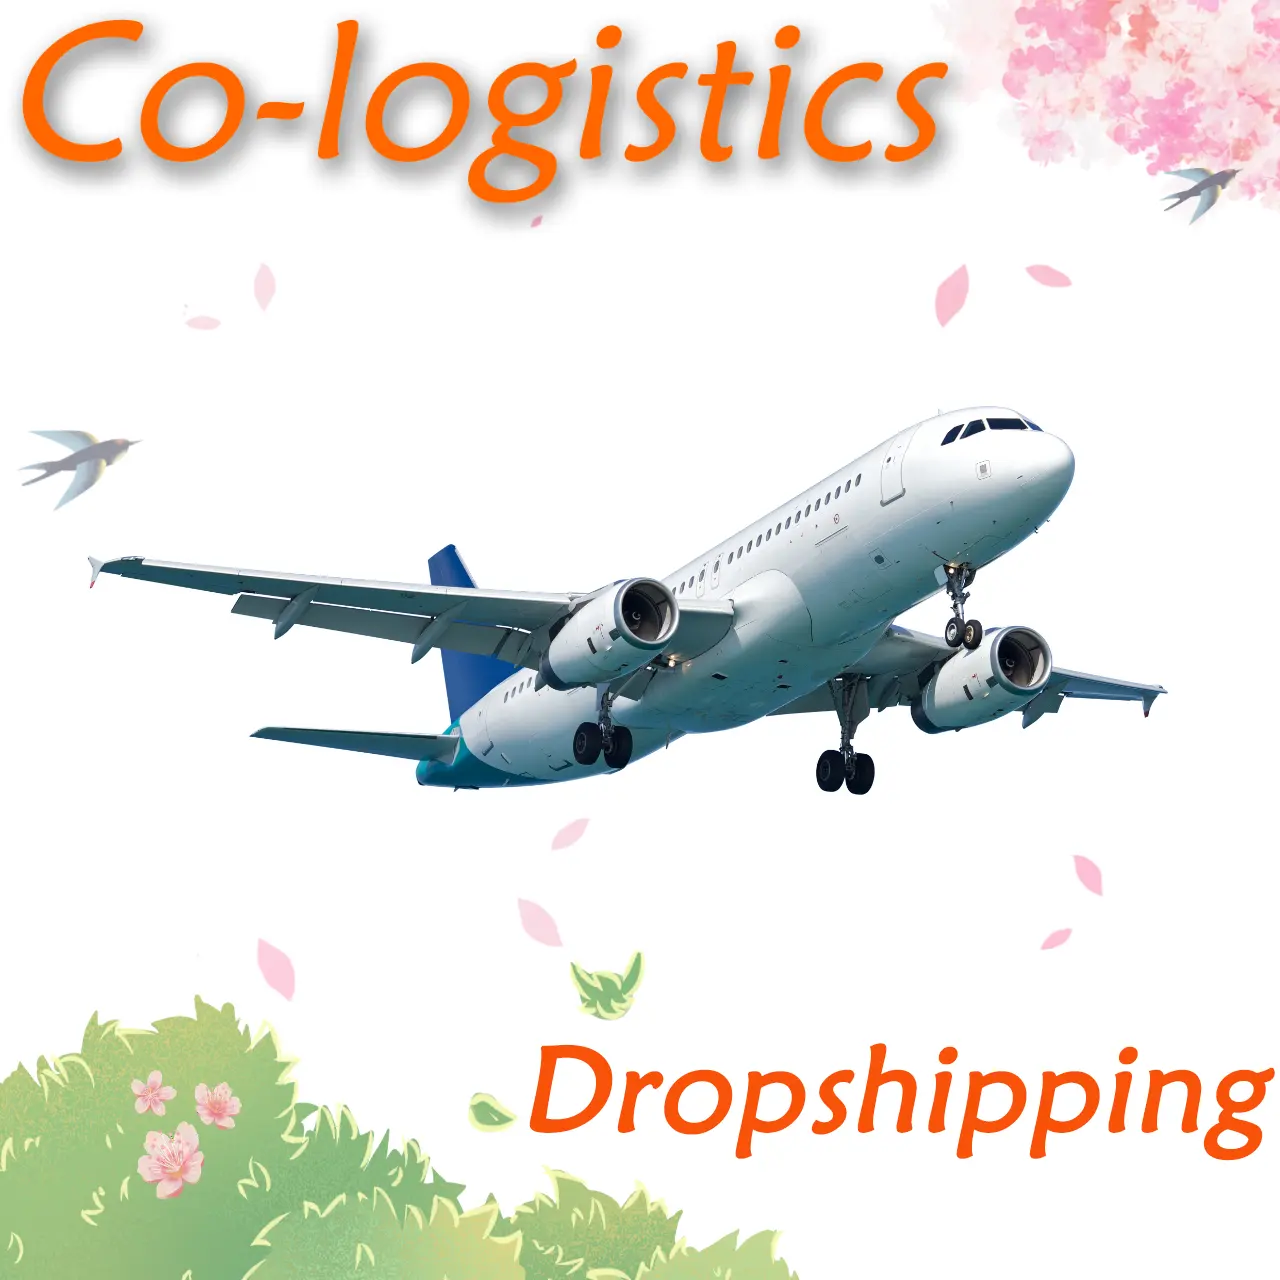 Forwarder Door Lower Price Door To Door Express Delivery Shipping Agent China To Colombia Airplane Shipping Freight Forwarder Air Freight